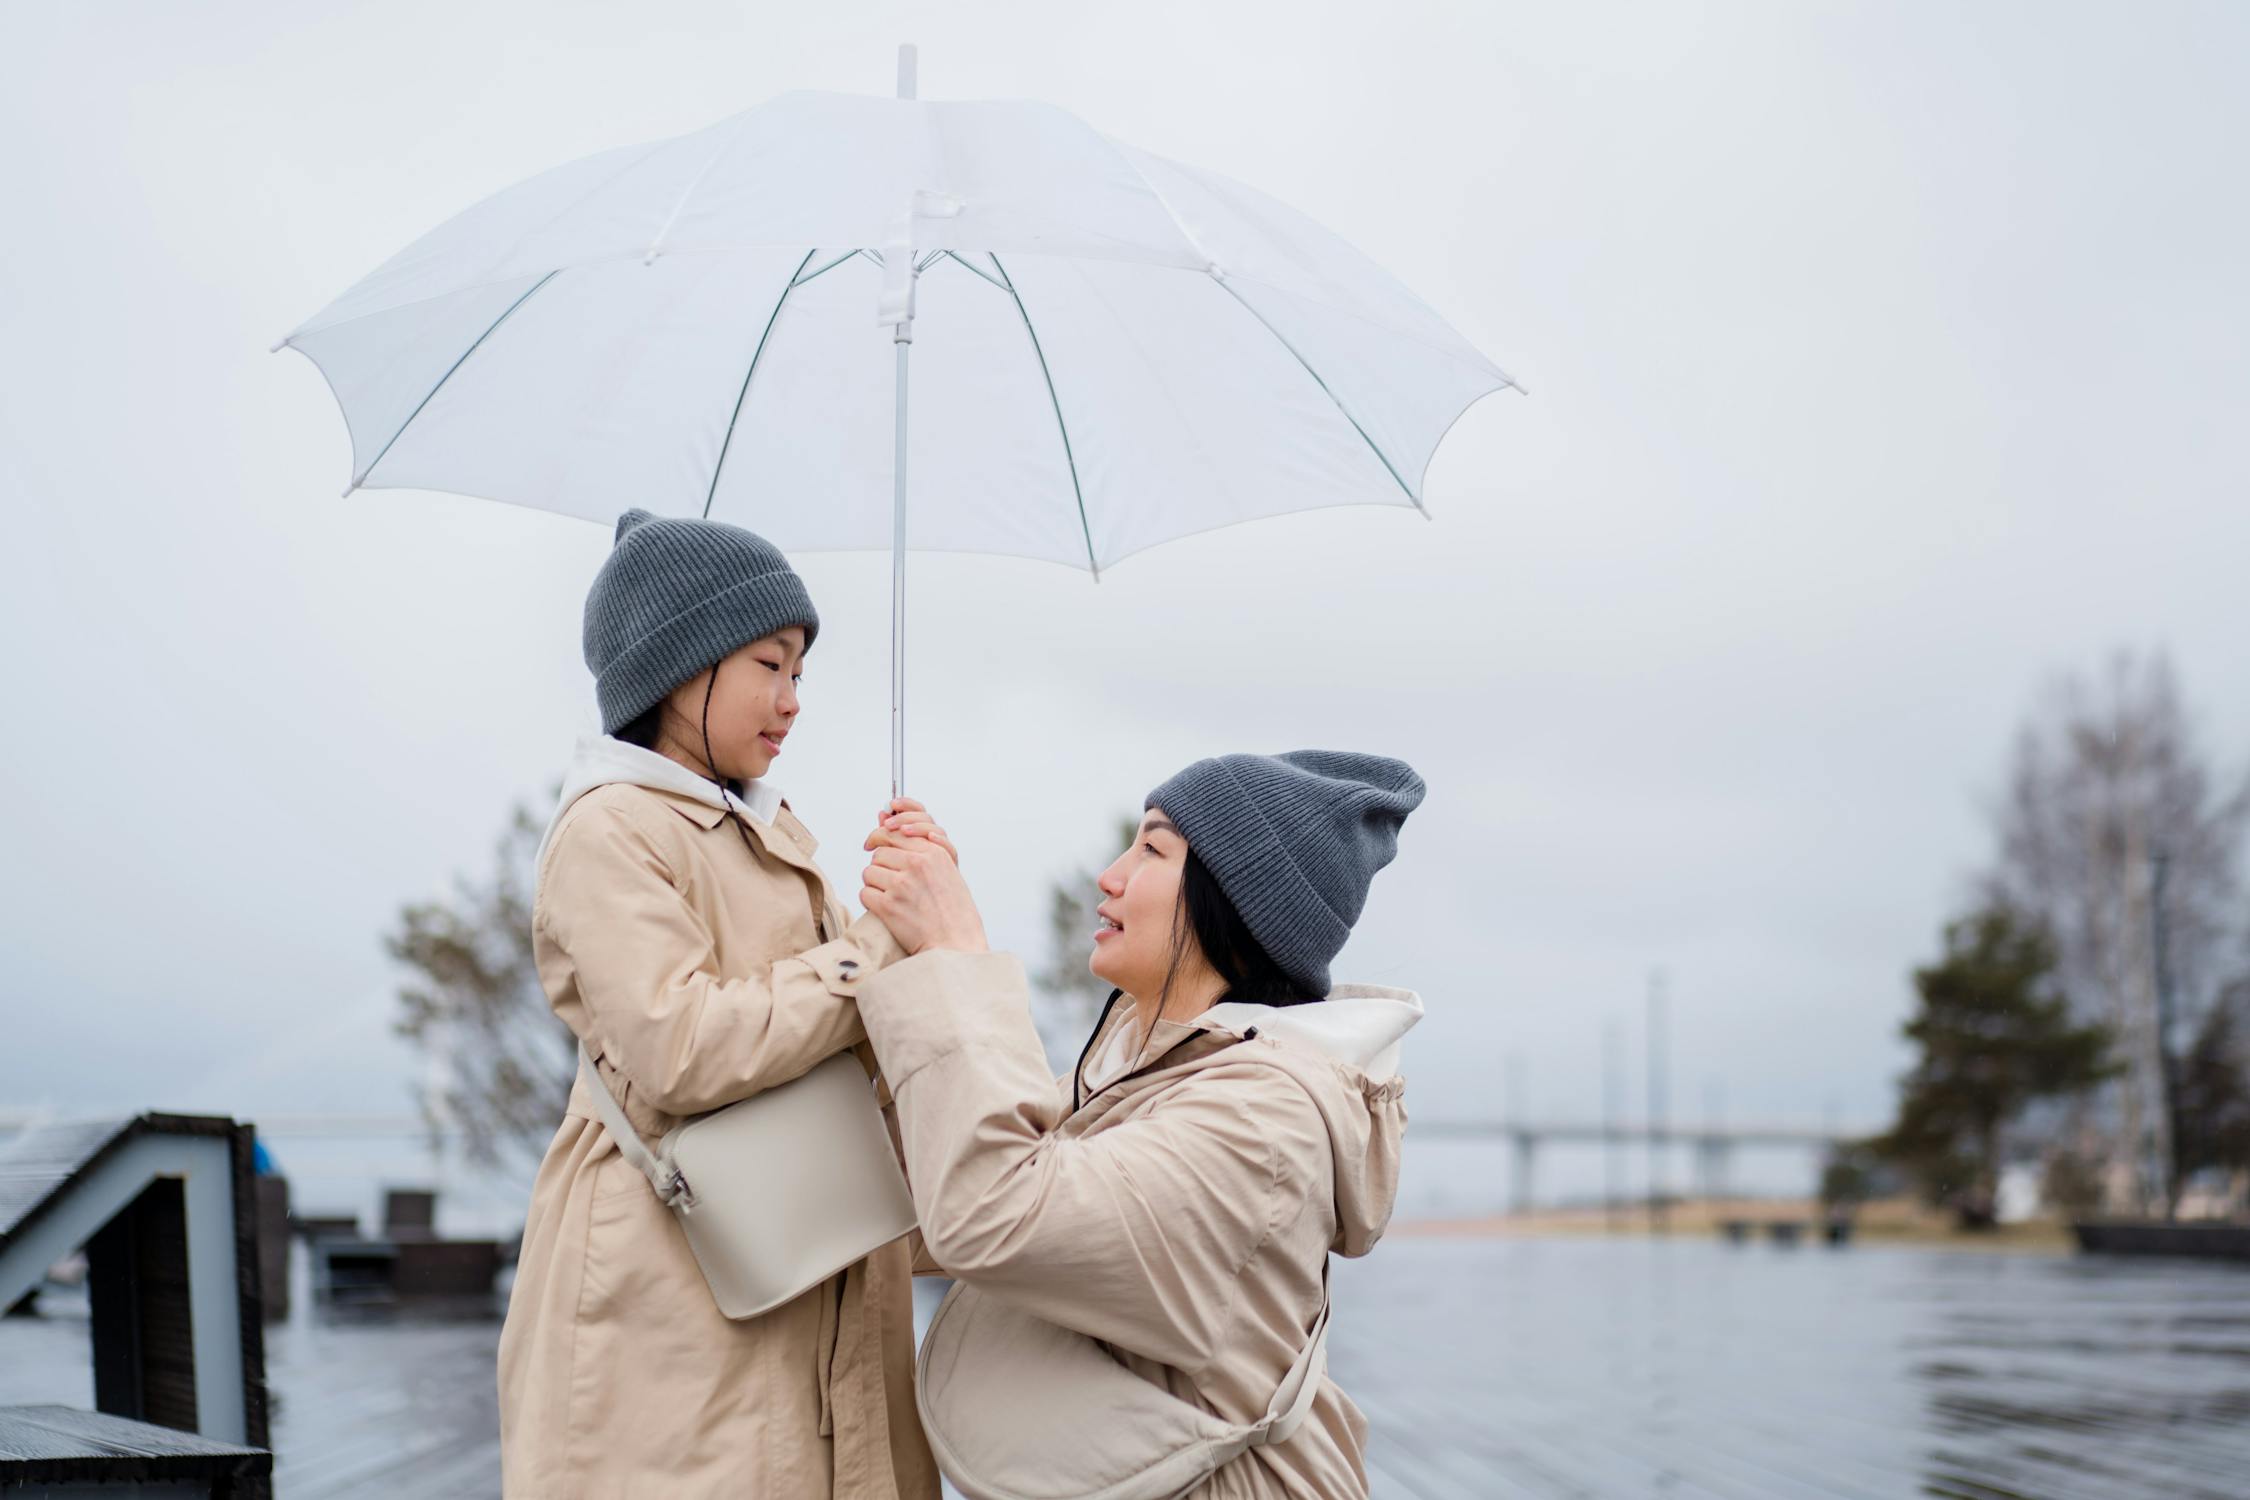 Rainy day Photo by Ron Lach  from Pexels: https://www.pexels.com/photo/a-woman-in-brown-coat-holding-umbrella-9506919/